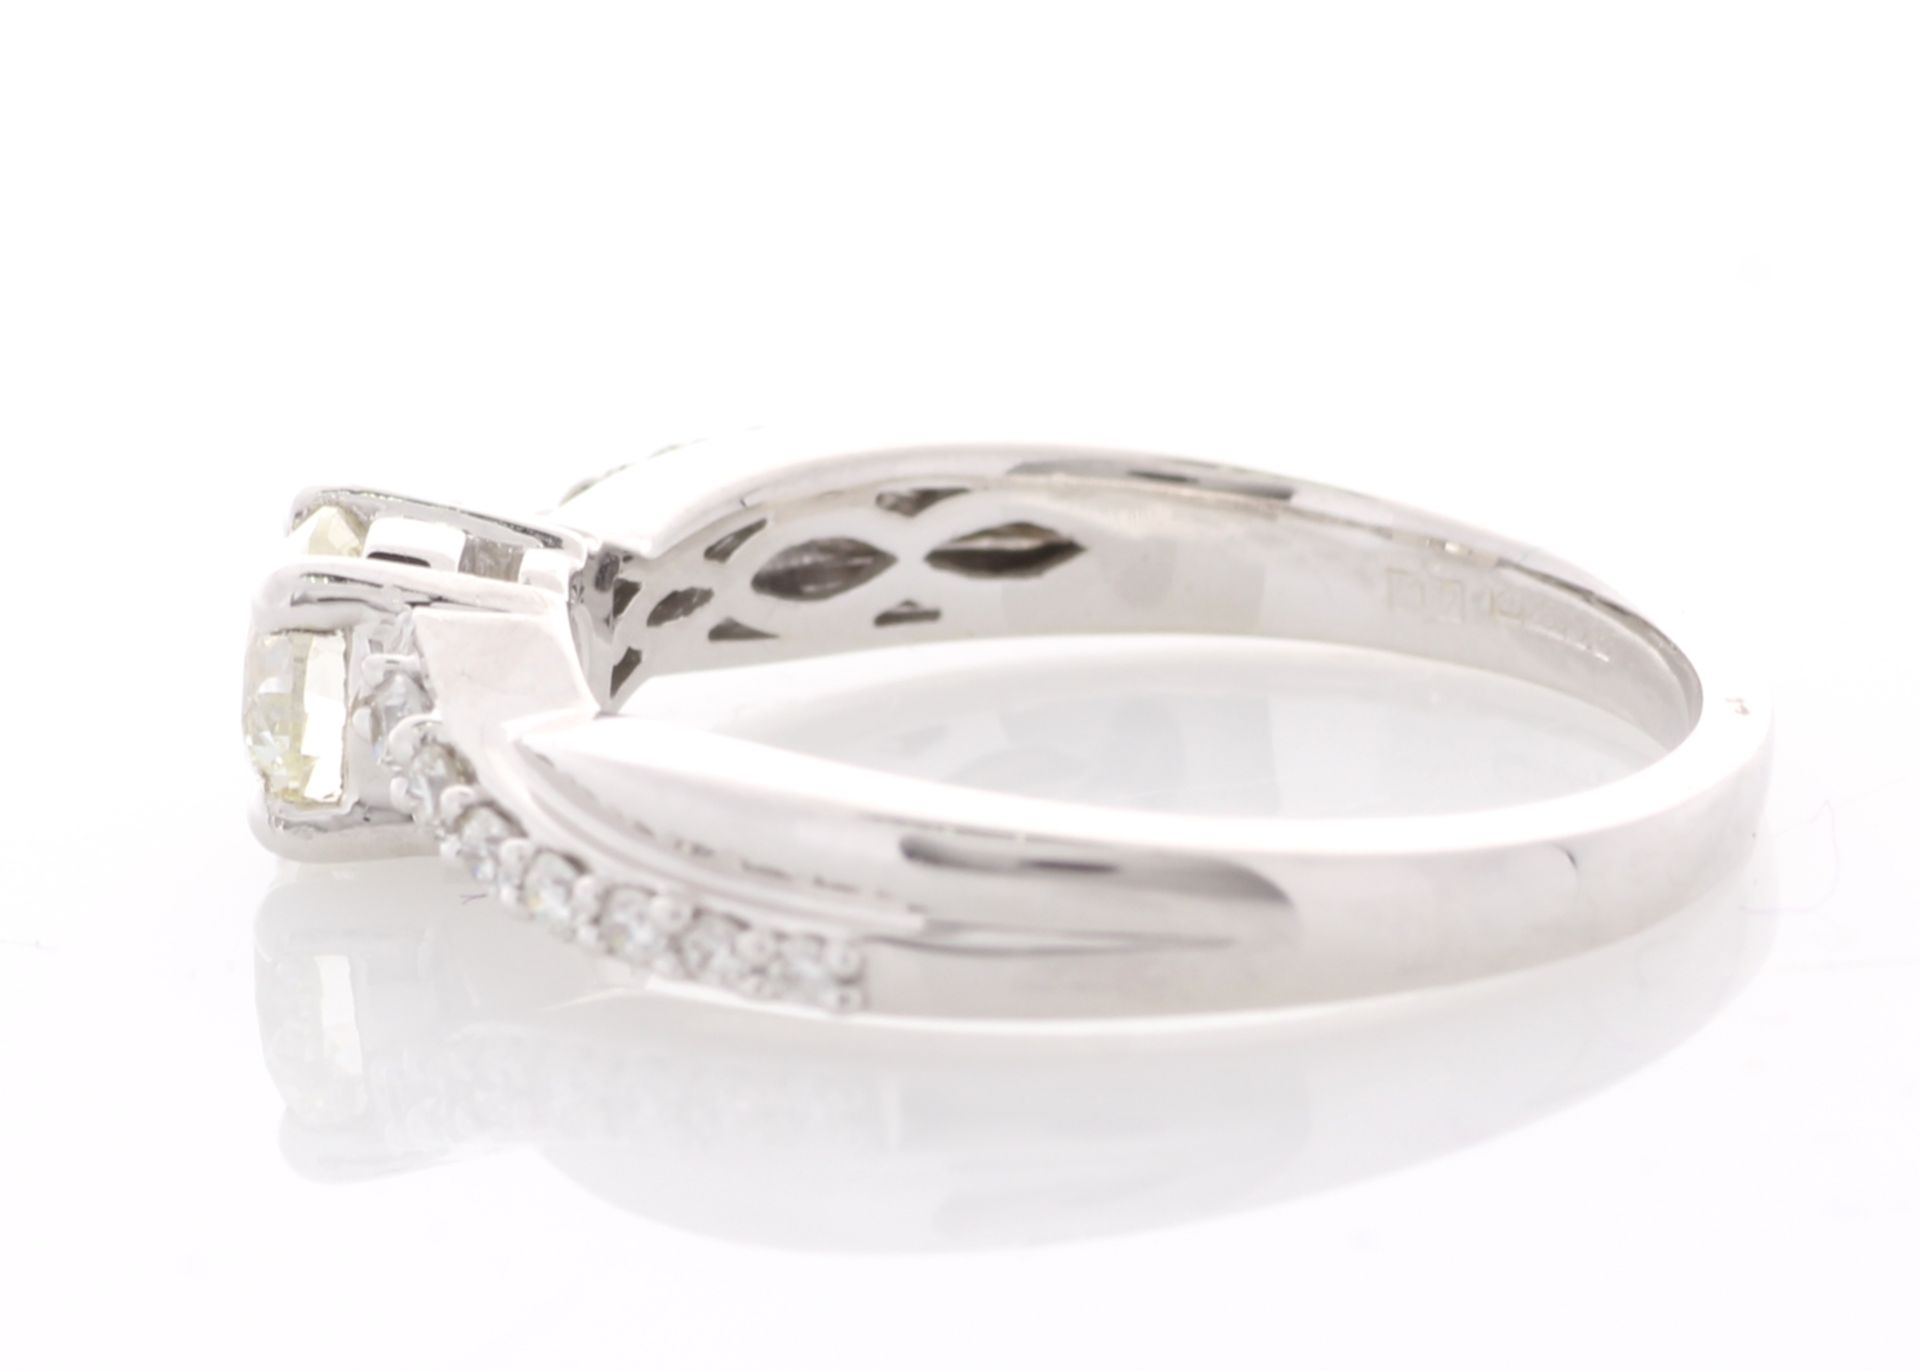 18ct White Gold Fancy Claw Set Diamond Ring 0.70 Carats - Valued By IDI £9,570.00 - A beautiful - Image 2 of 5